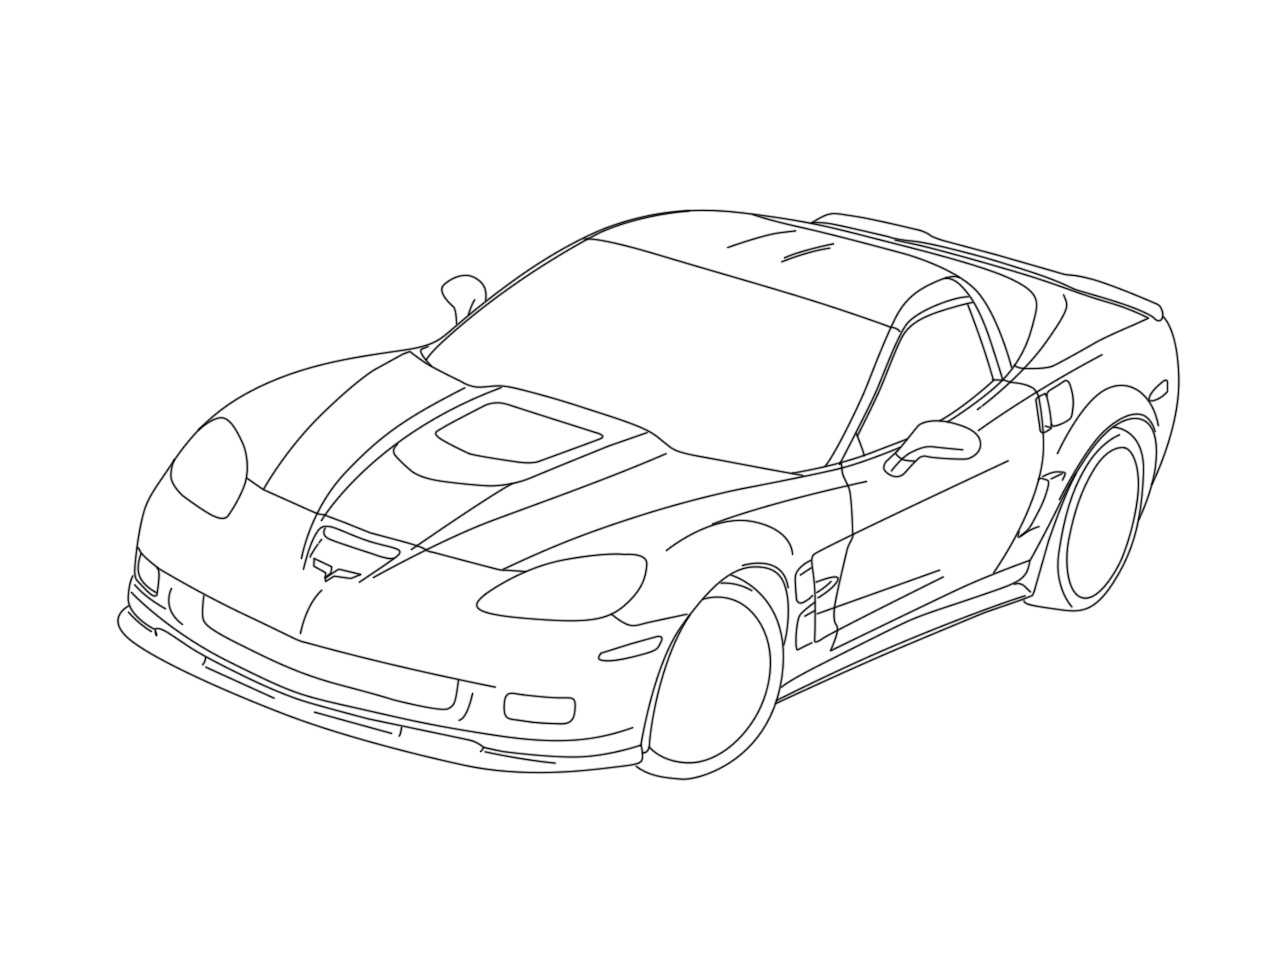 Corvette Coloring Pages Corvette z06 cars coloring pages to color, print and download for free along with bunch of simply do online coloring for corvette z06 cars coloring pages directly from your gadget, support. corvette coloring pages